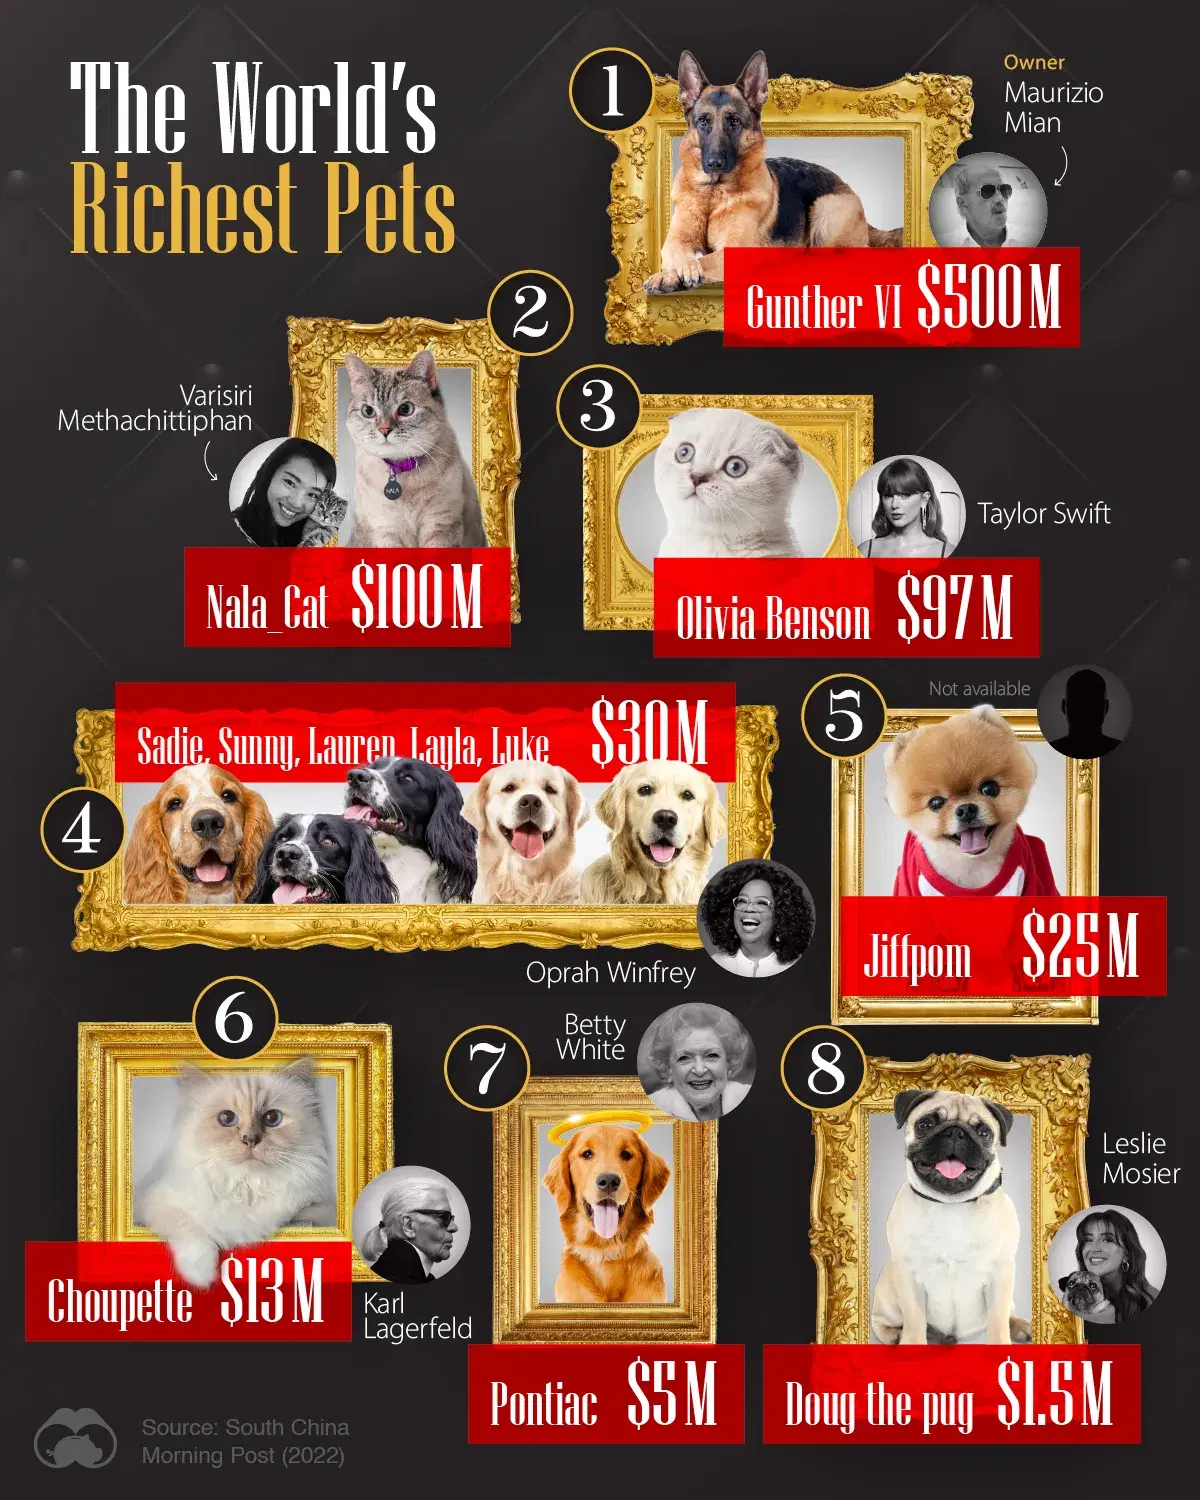 These Pets are Richer Than Most People 🐶